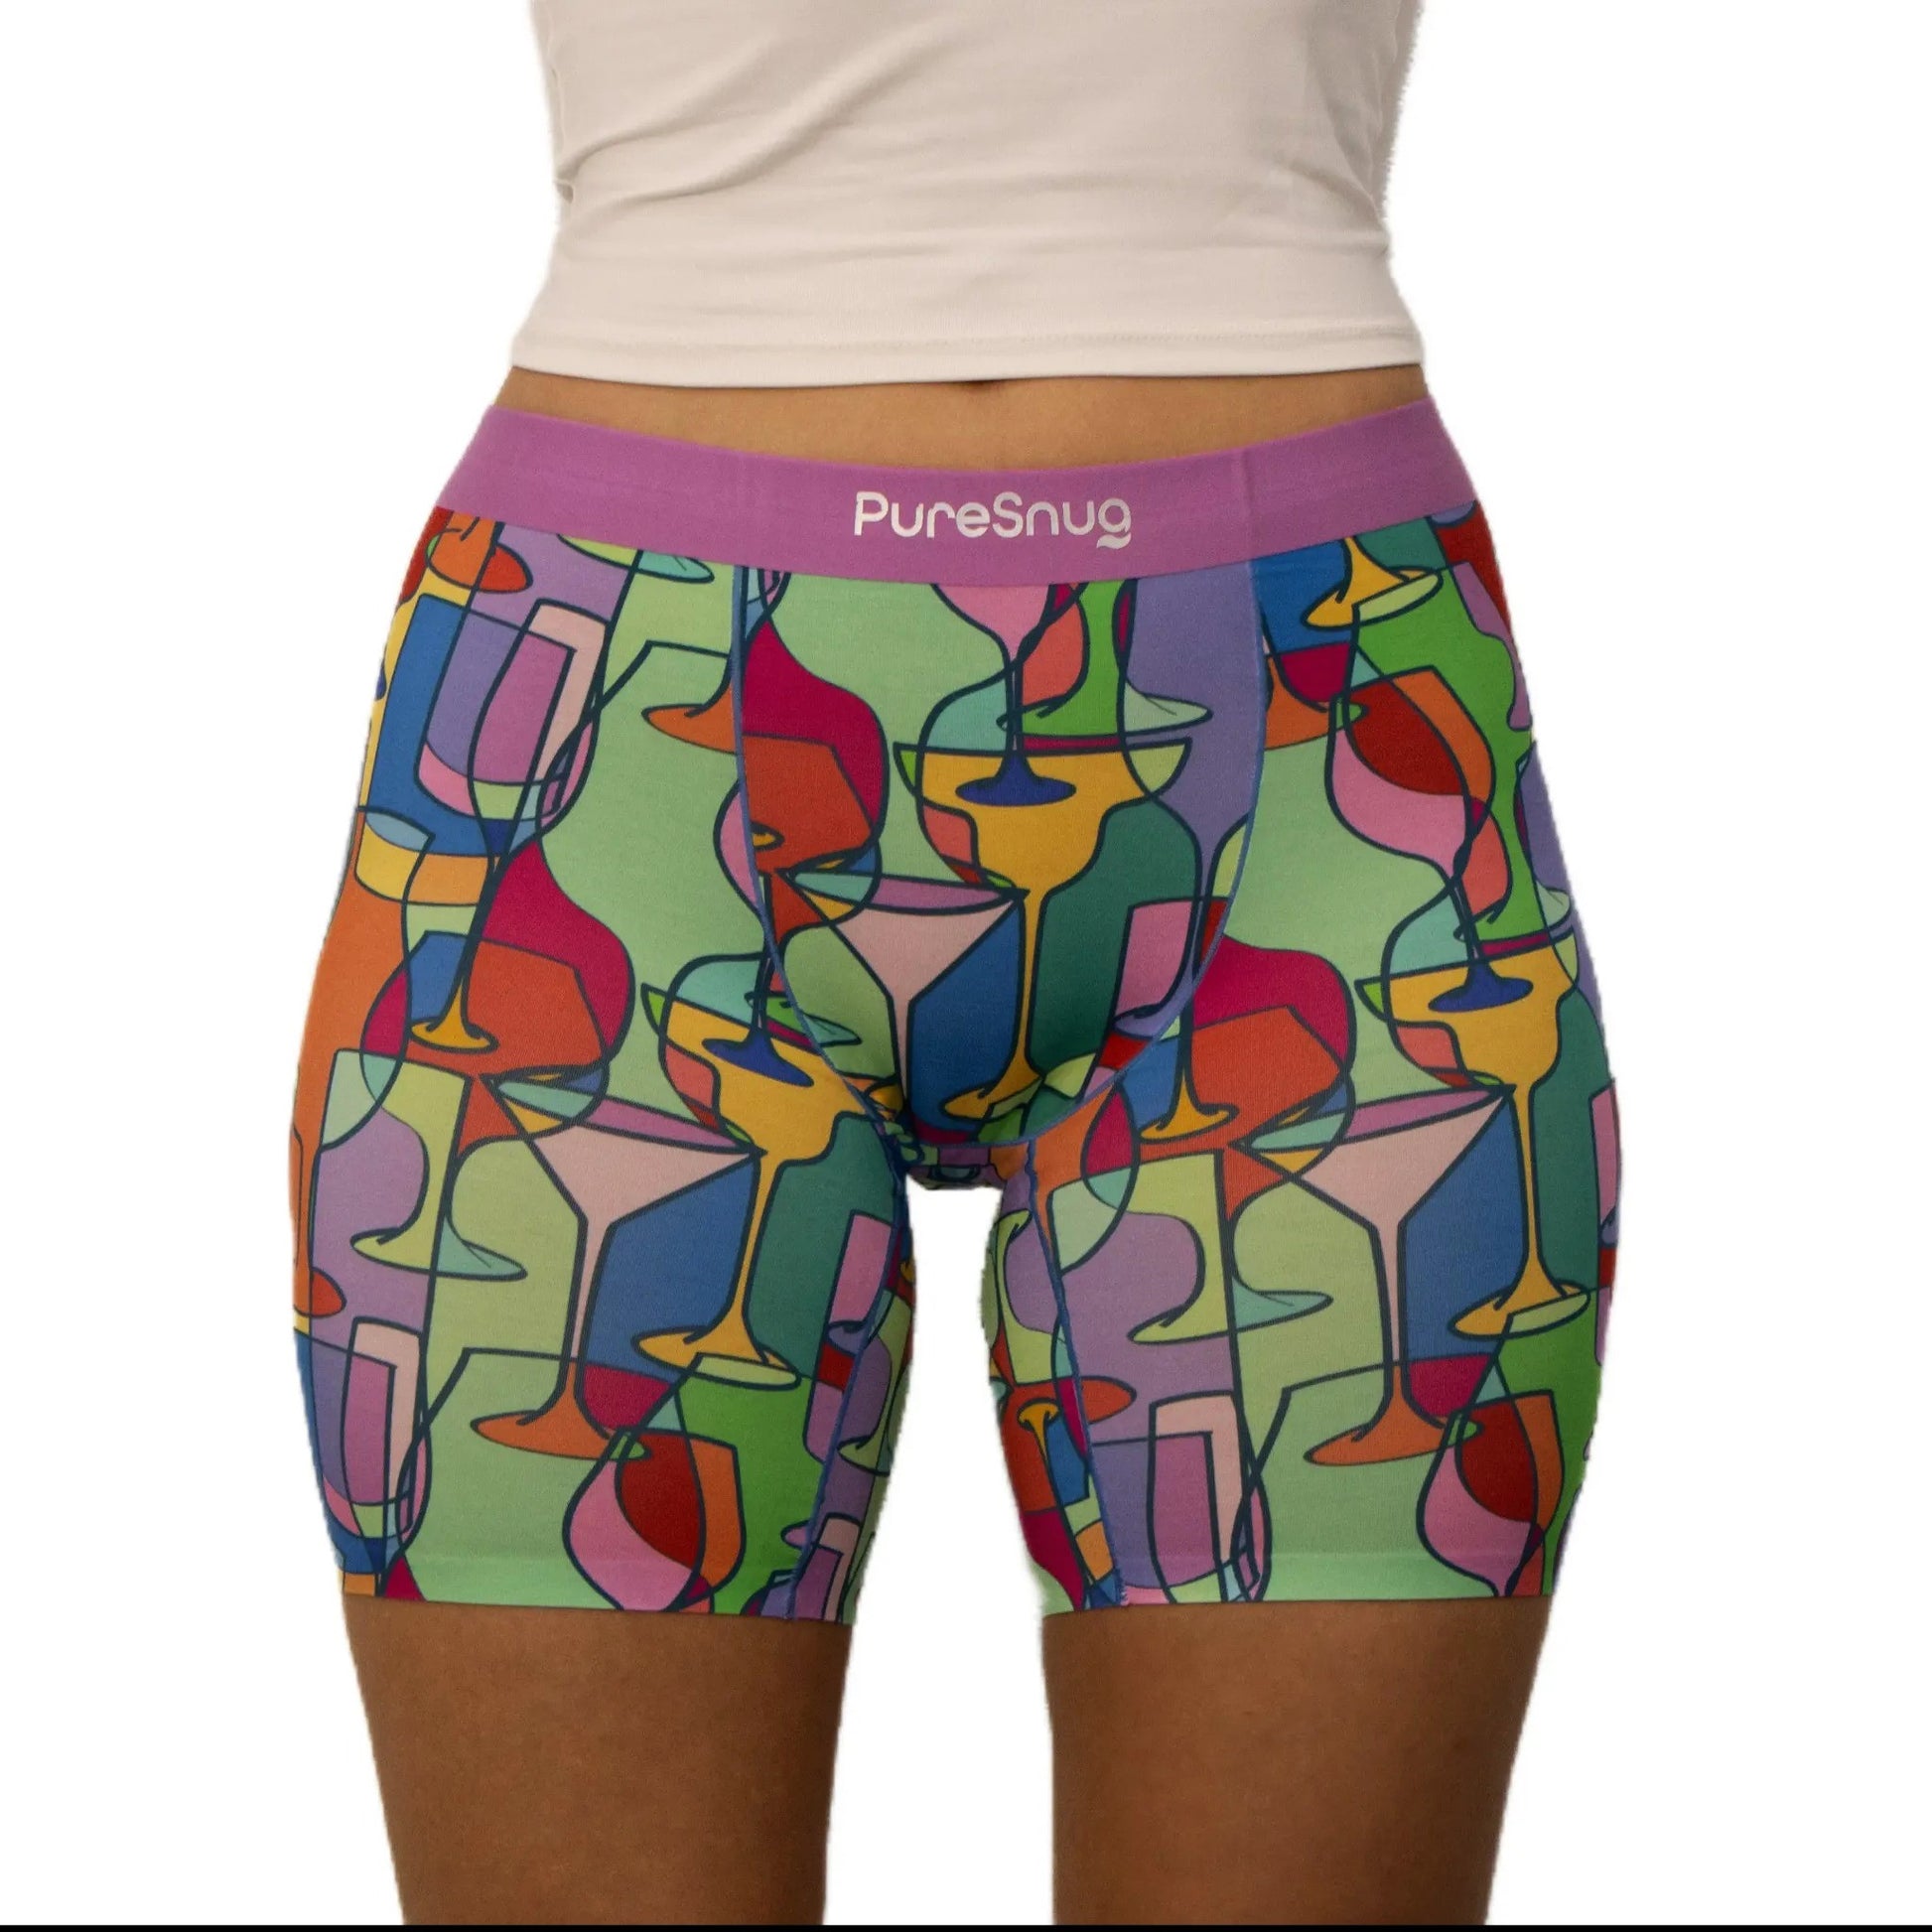 puresnug ladies' boxer briefs front view in wine party print